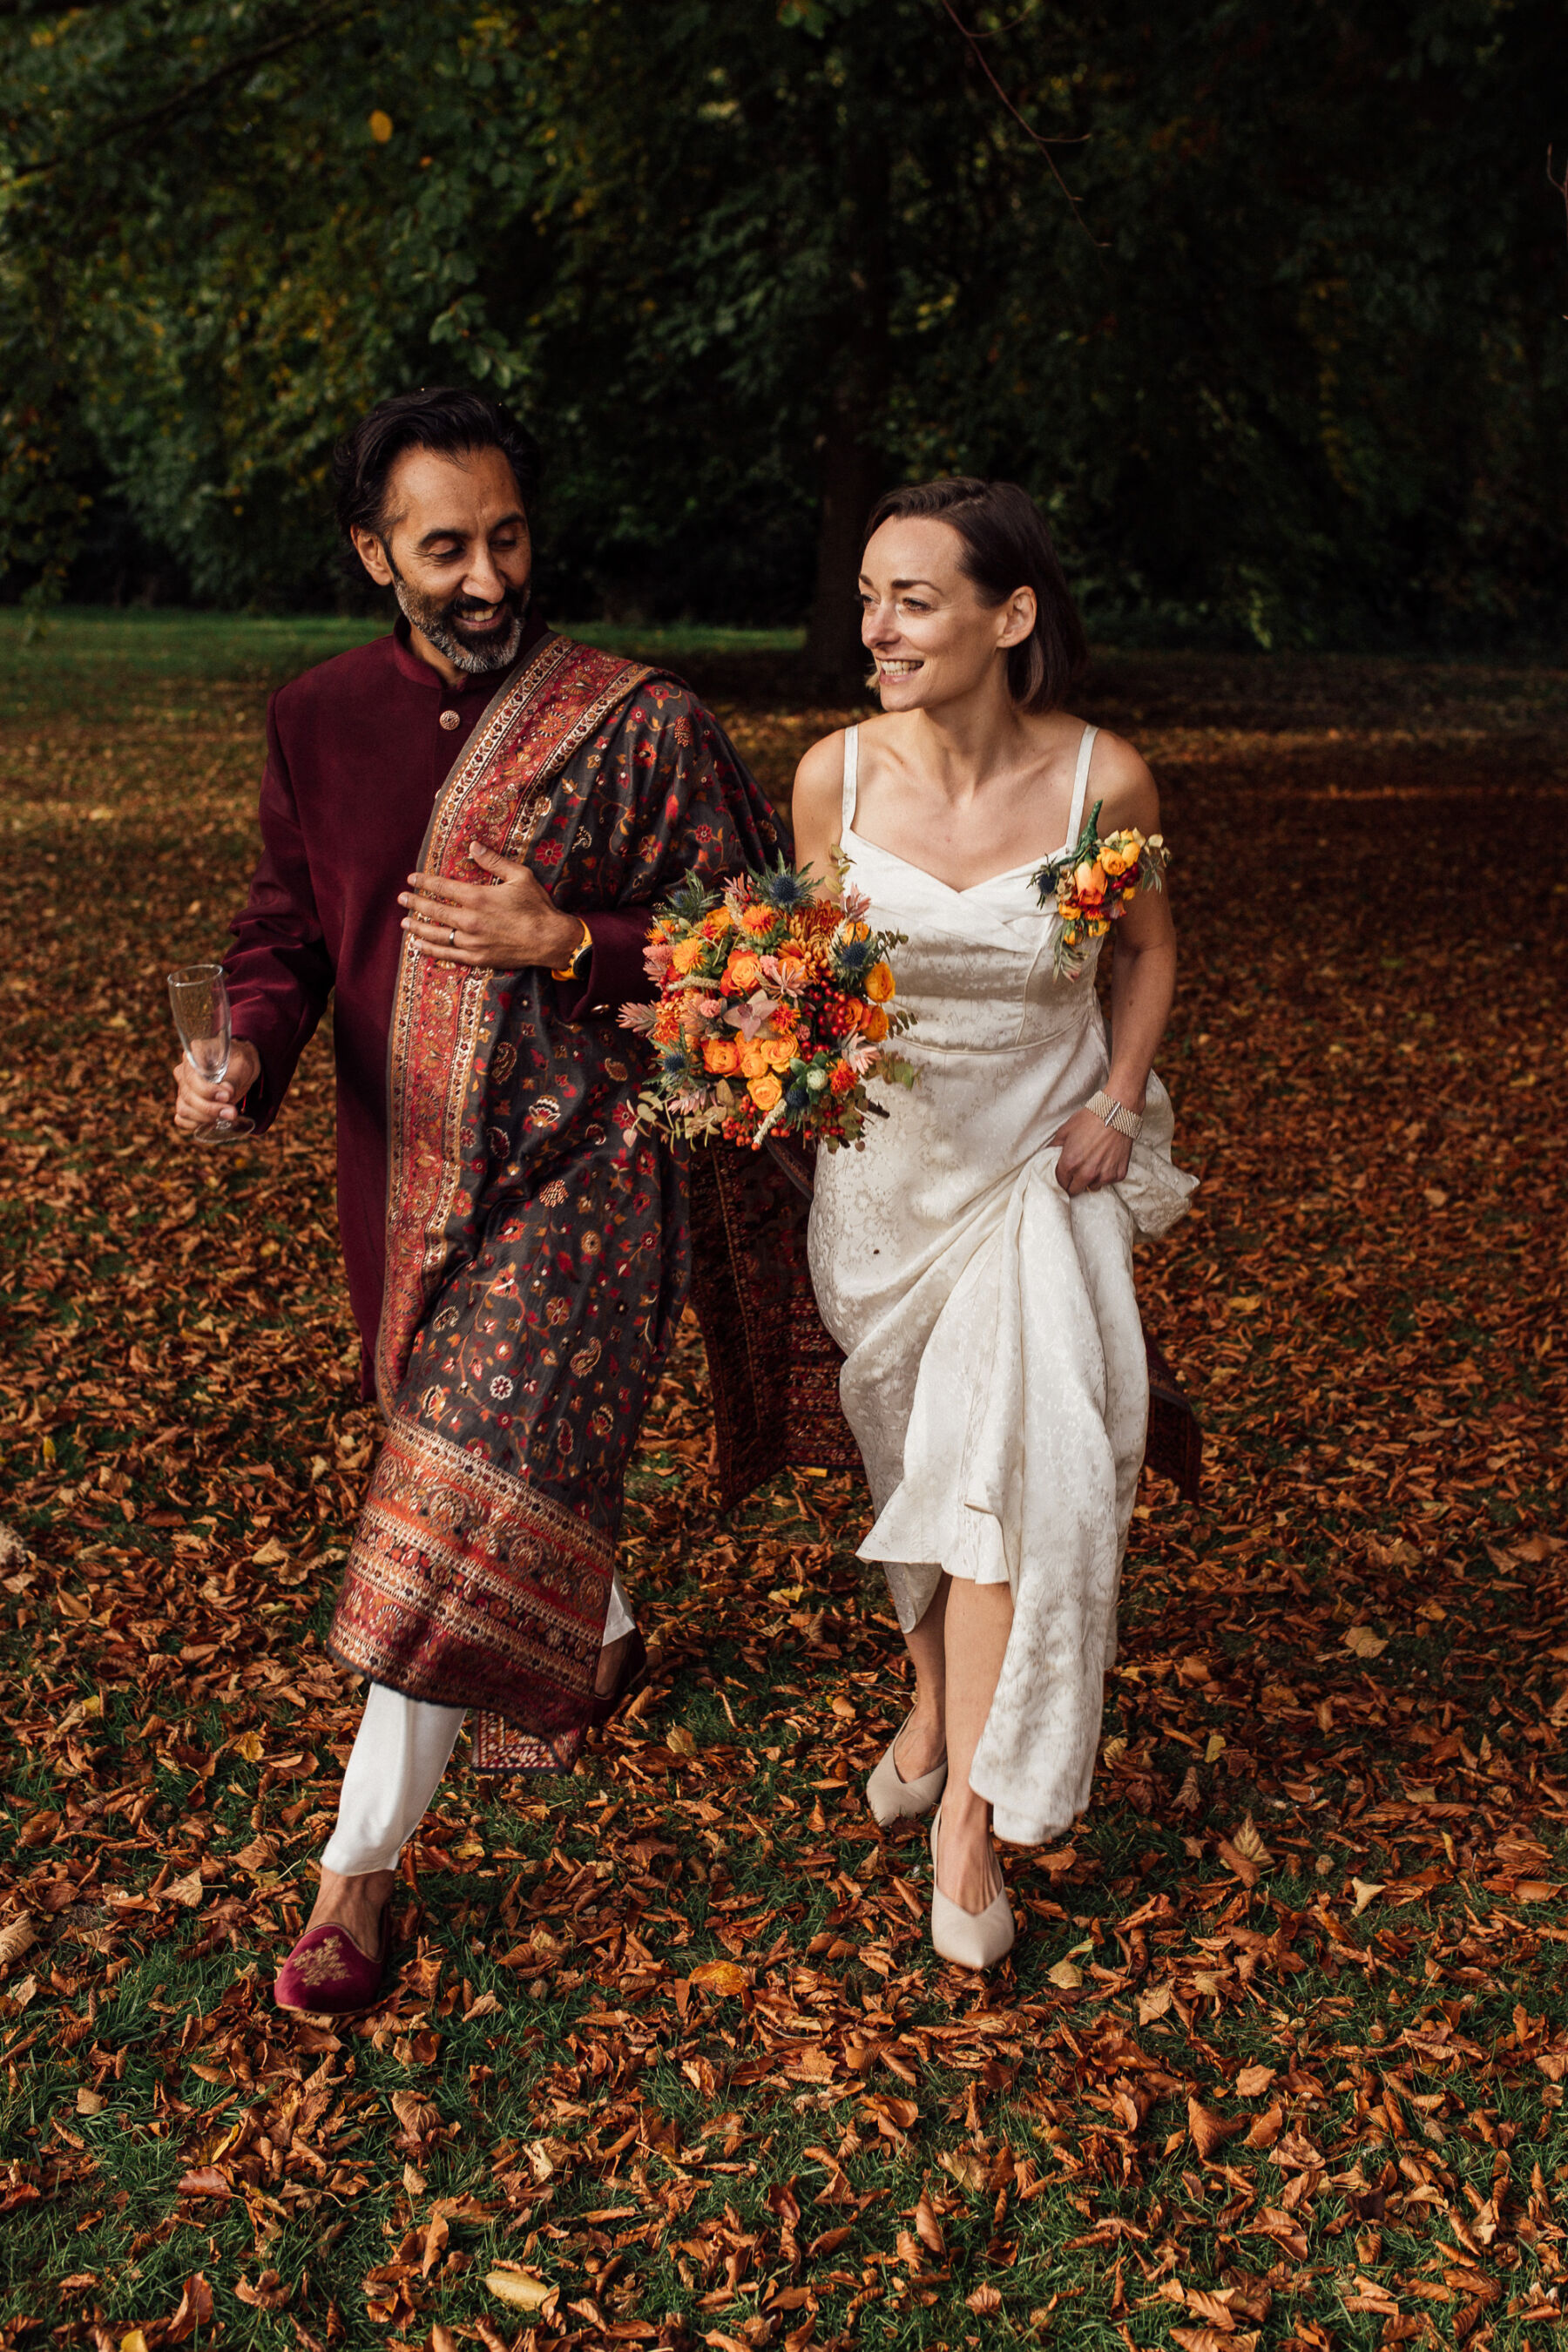 Bride and groom at their Autumn wedding at Barton Hall.